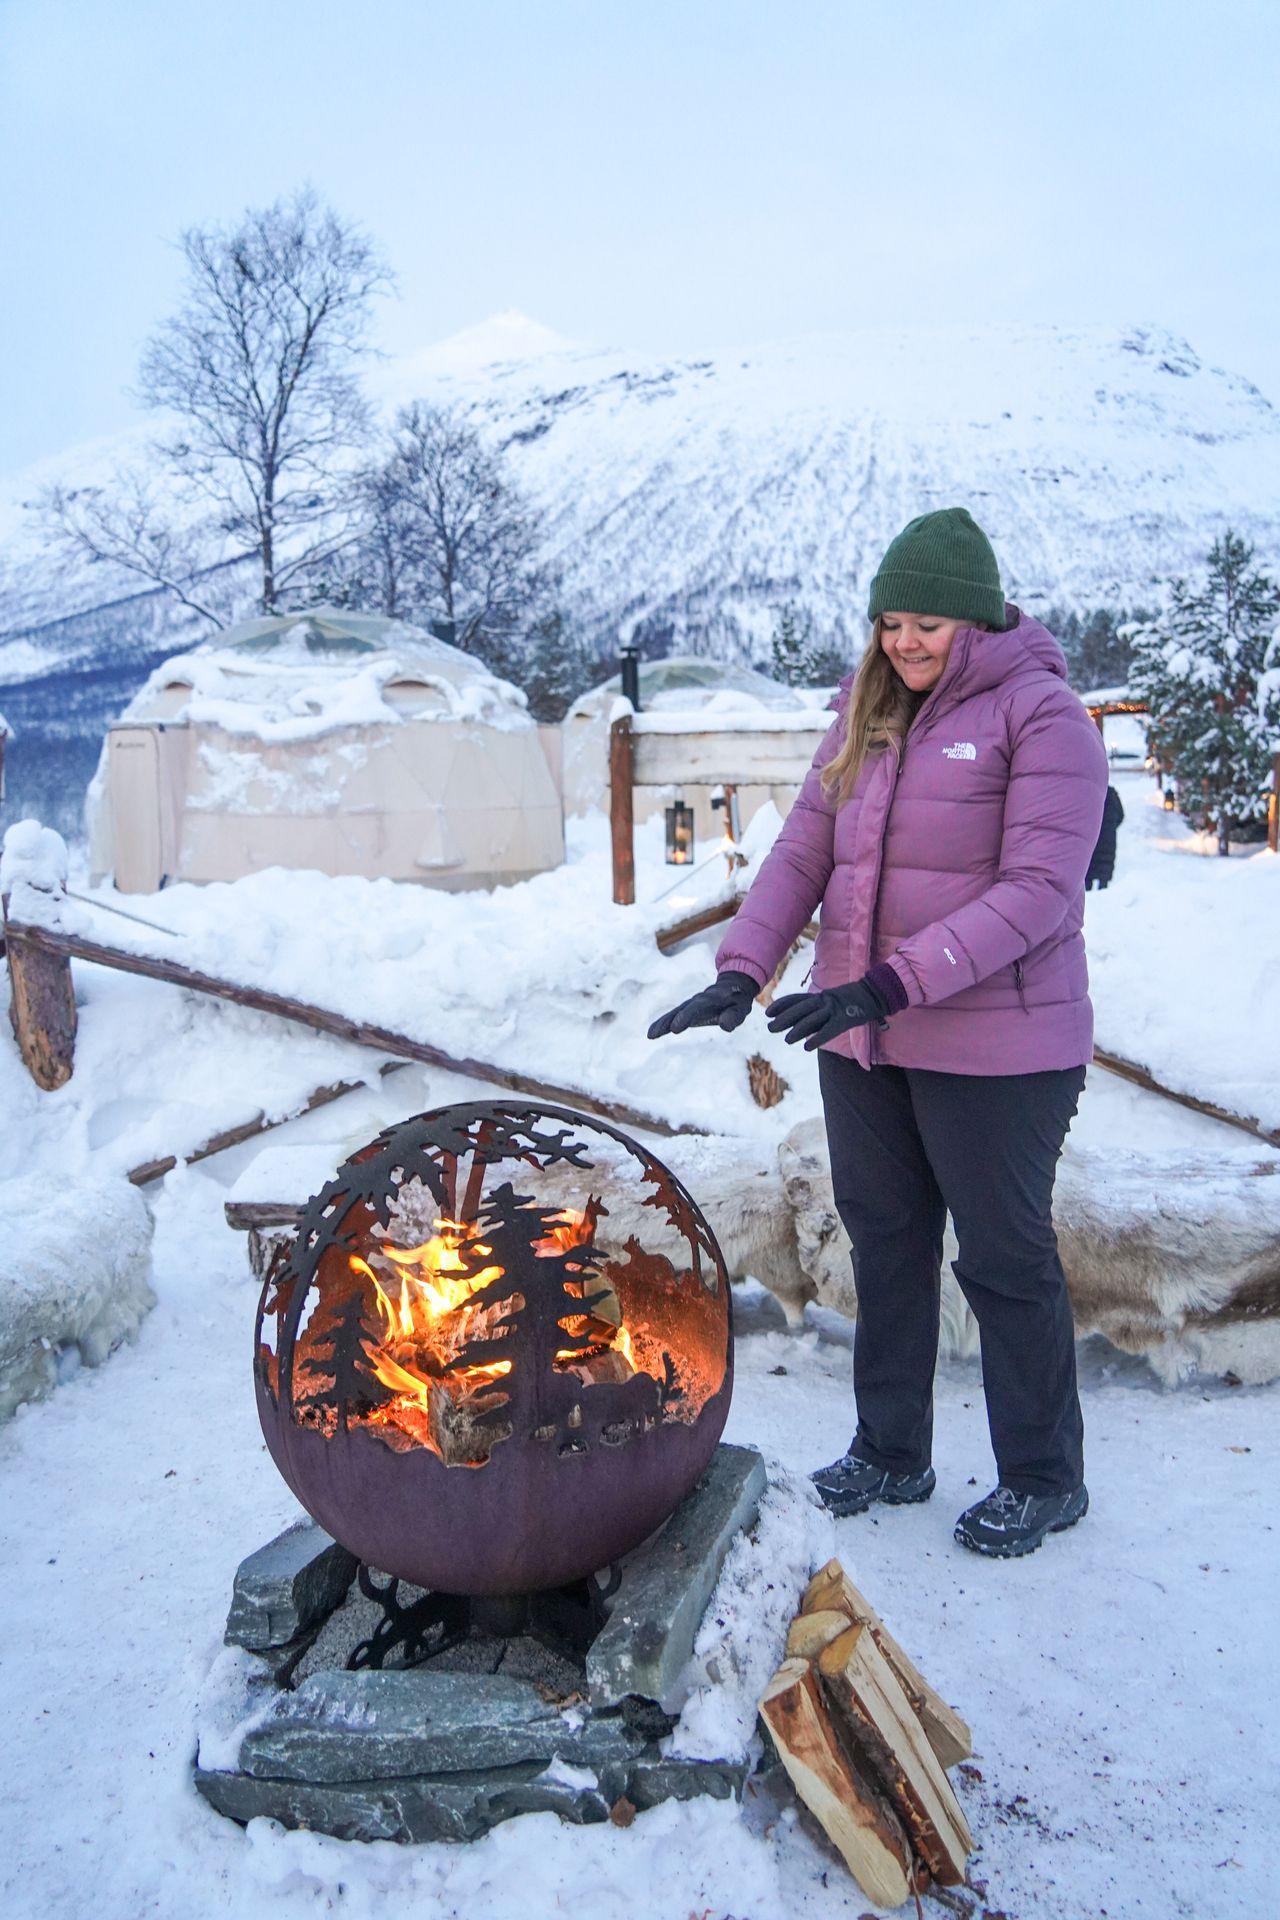 Lydia warming her hands at a campfire at Camp Tamok, which is the same property as the Tromso Ice Domes